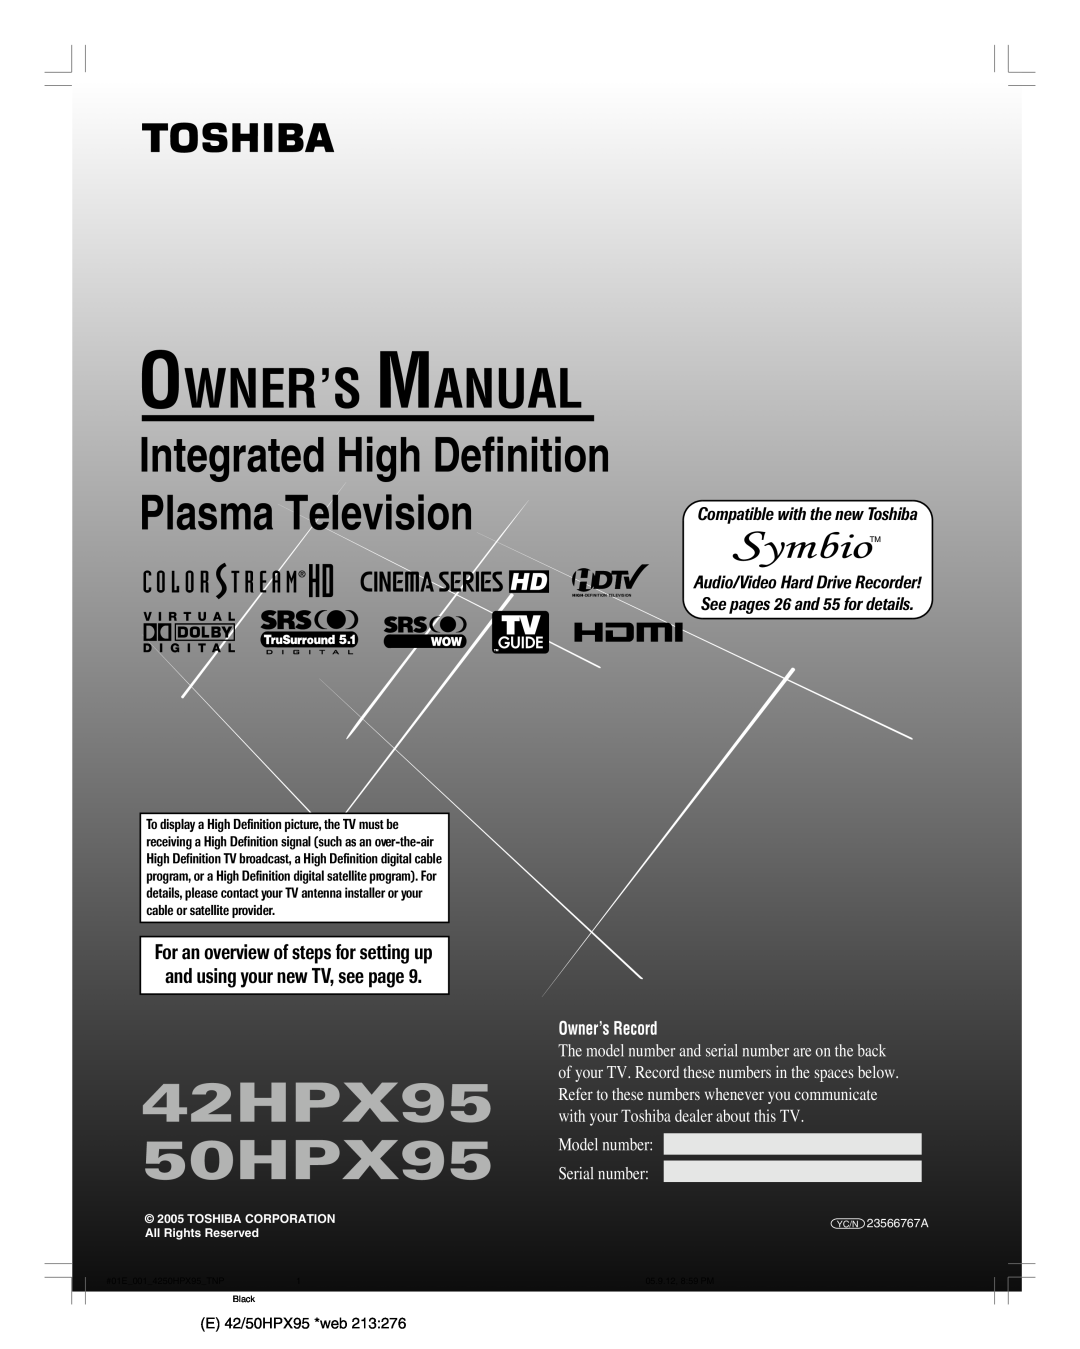 Toshiba owner manual 42HPX95 50HPX95, Owner’S Manual, Plasma Television, Integrated High Definition, Owner’s Record 